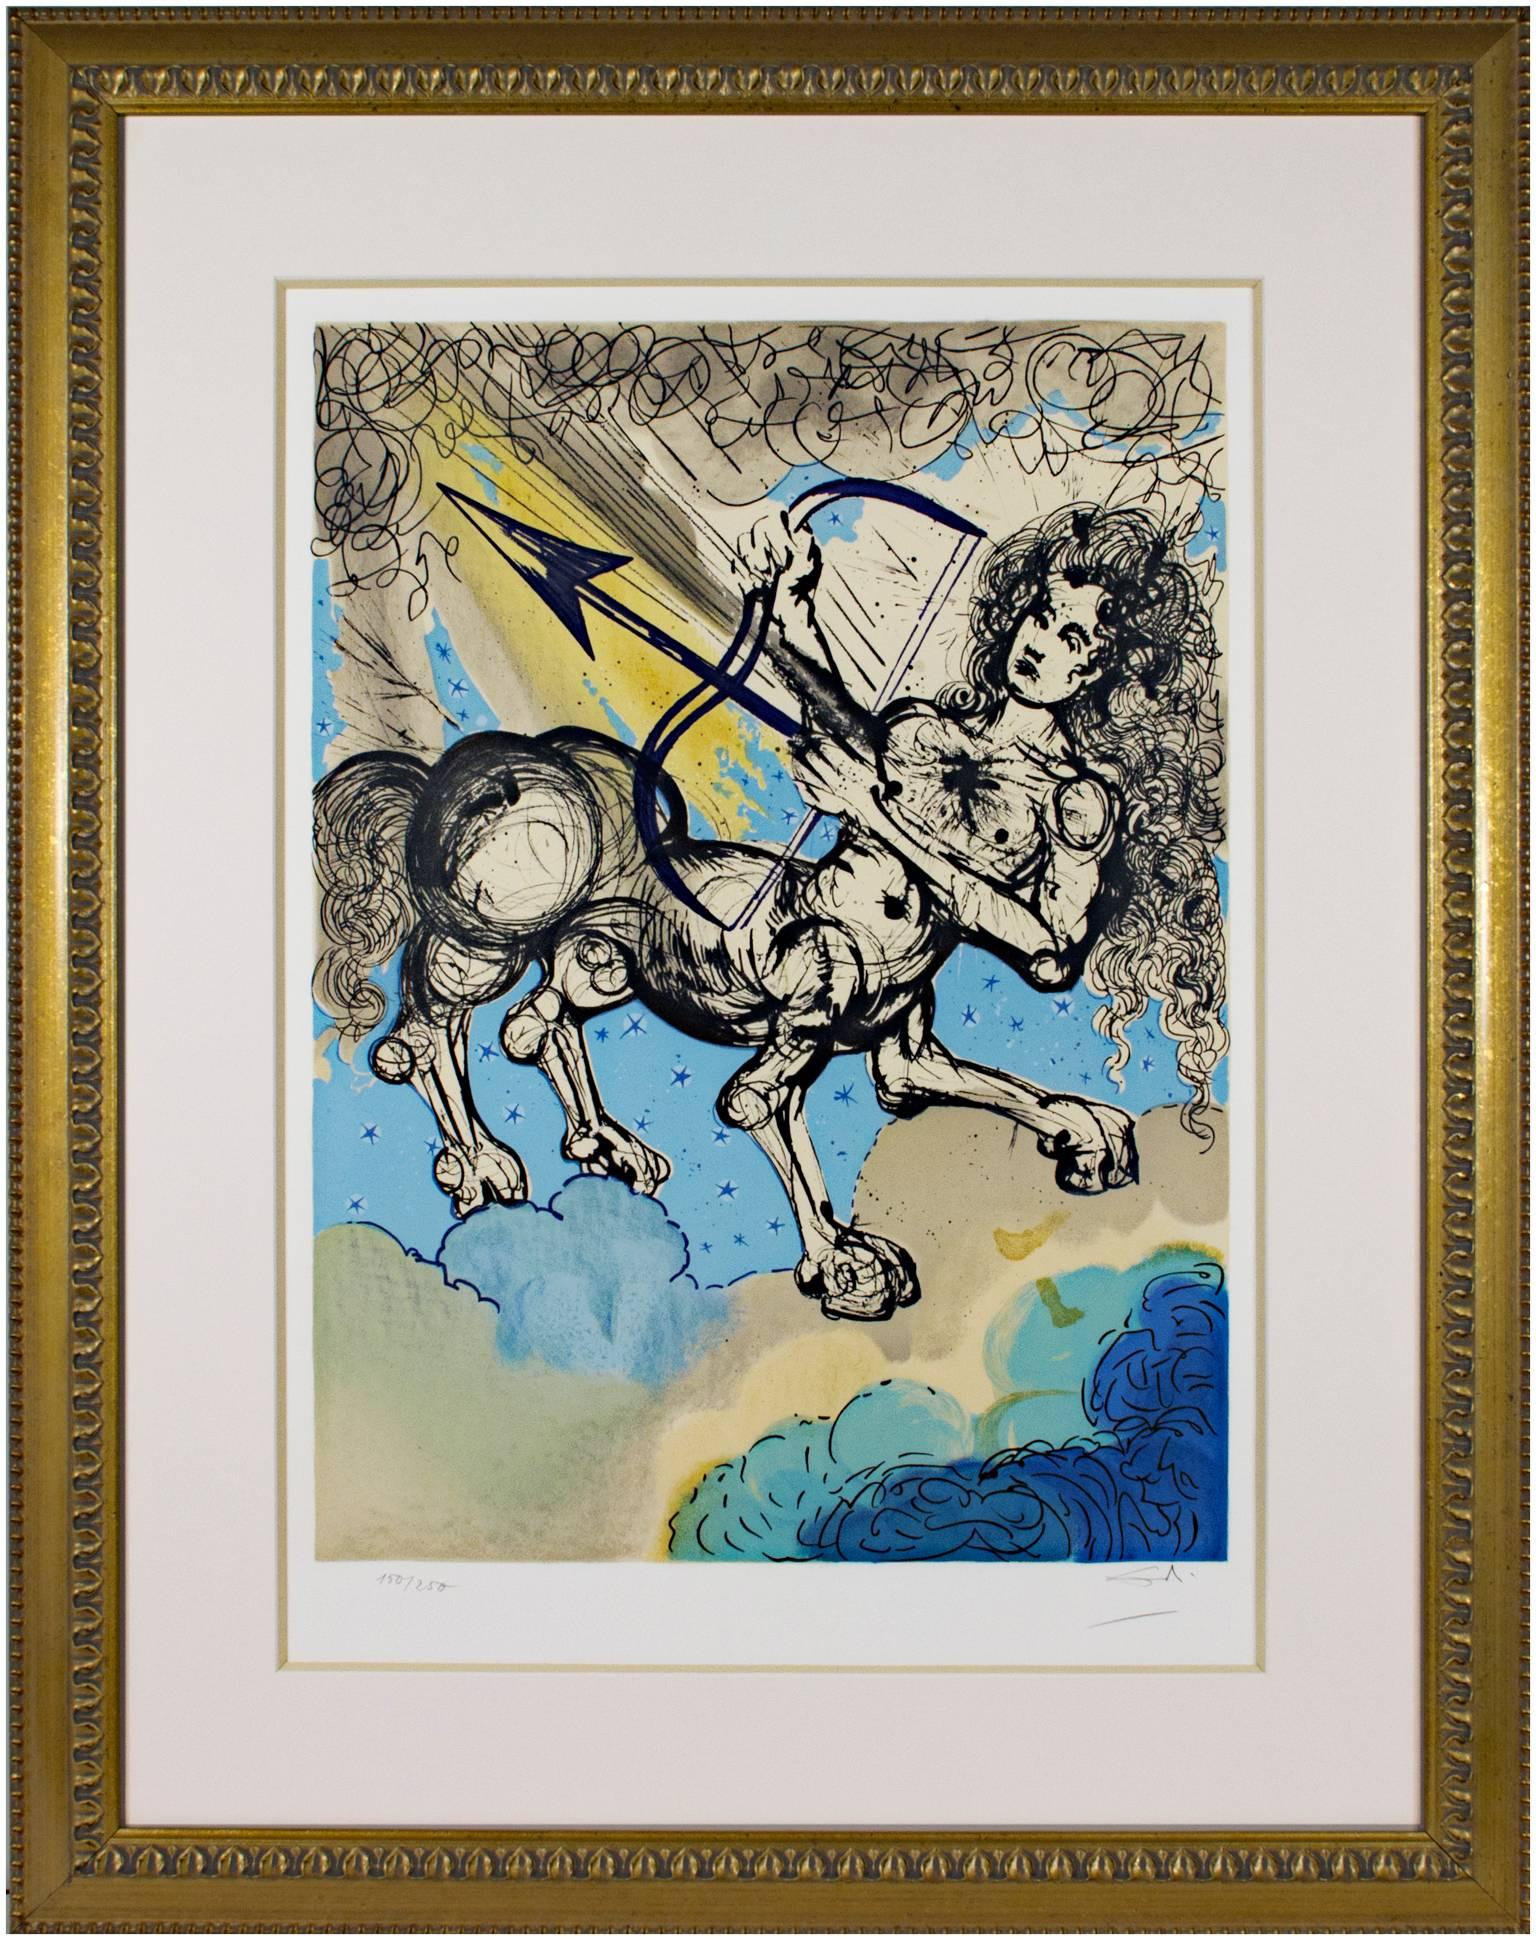 Sagittarius from Signs of the Zodiac Series (original color lithograph) - Print by Salvador Dalí